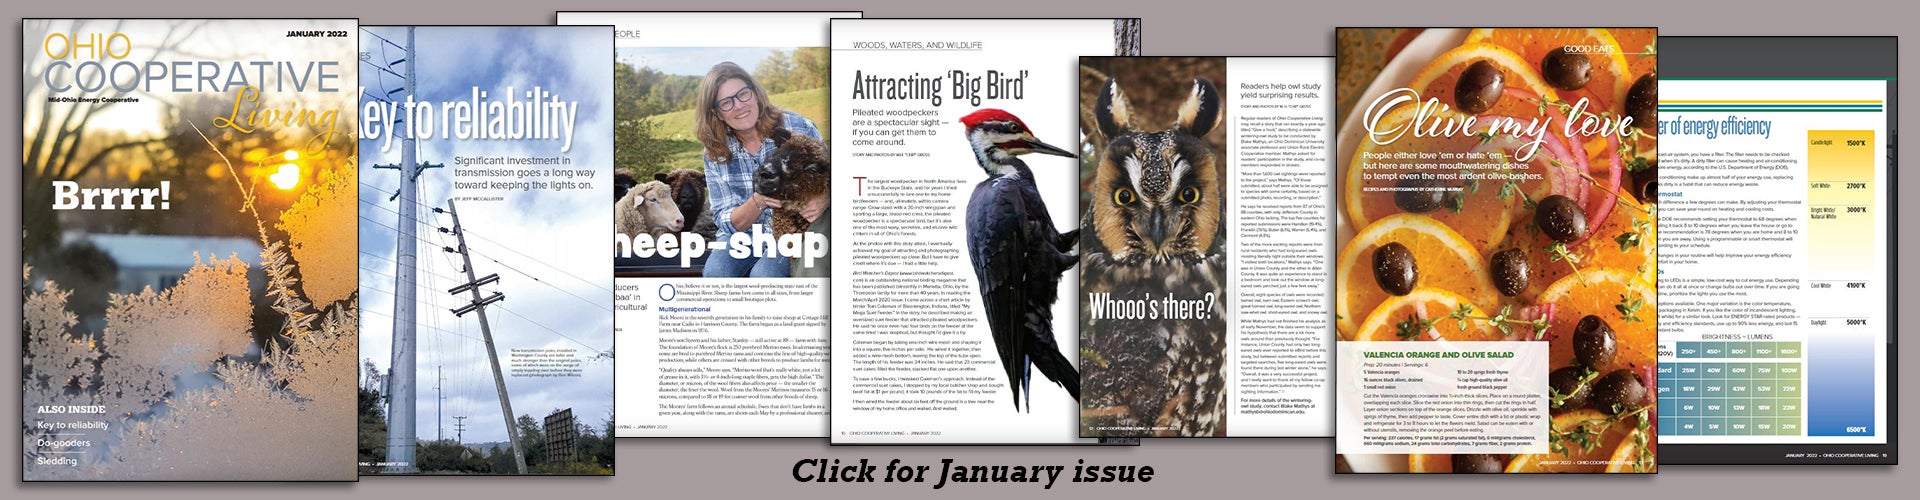 Check out the January issue of Ohio Cooperative Living